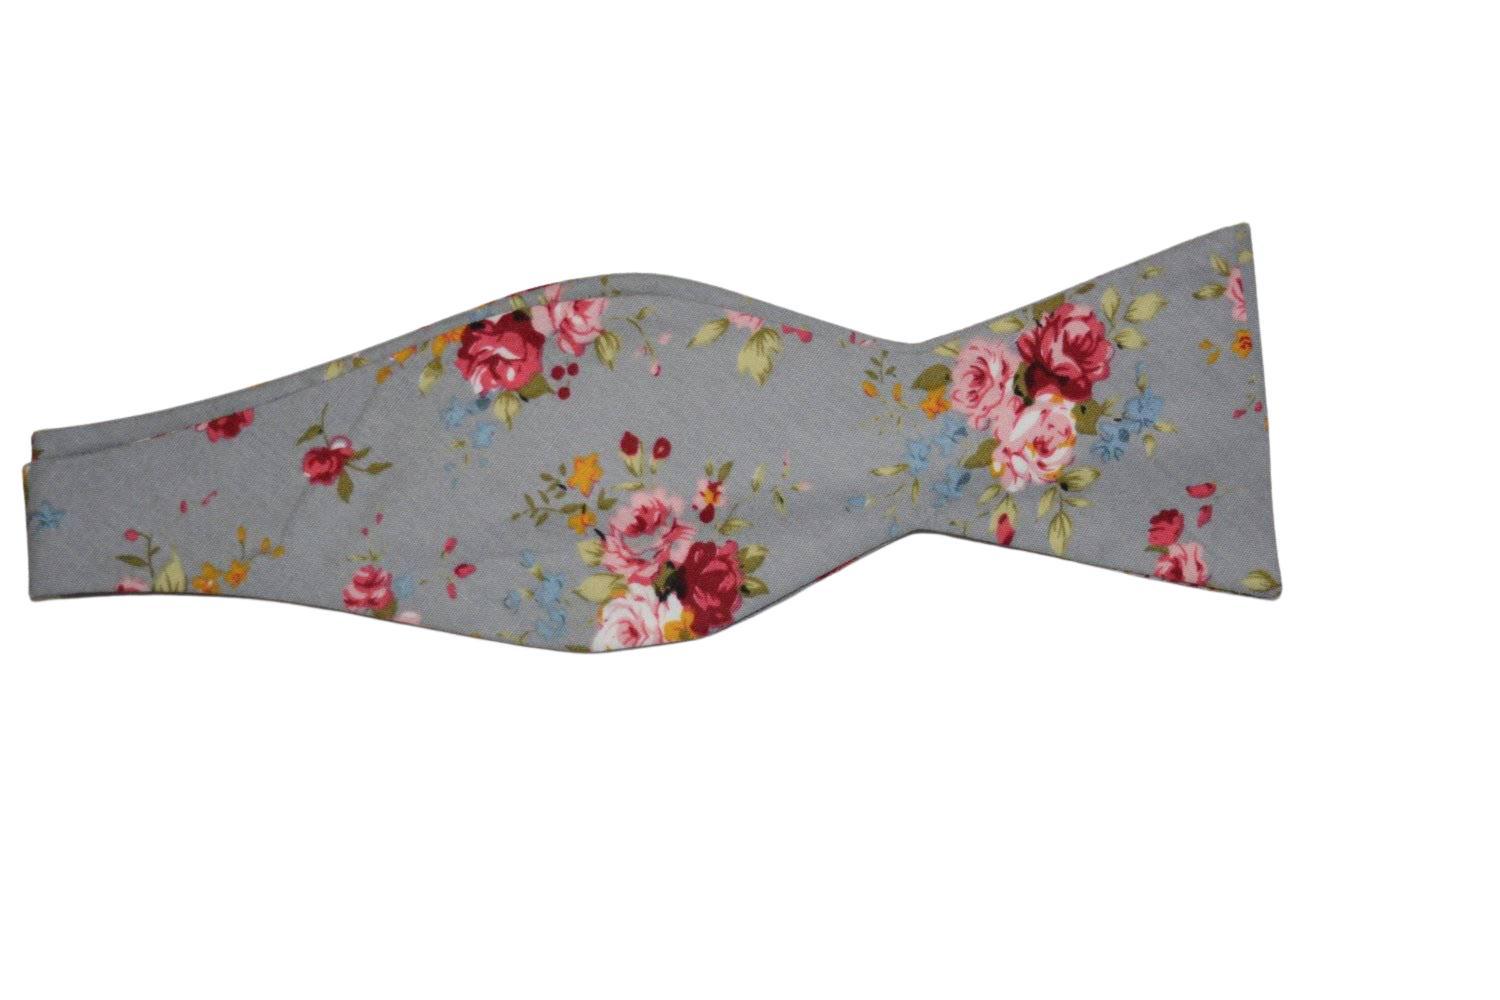 Self Tie Bow Tie Mytieshop - RAIN-Gray Floral Bow Tie 100% Cotton Flannel Handmade Adjustable to fit most neck sizes 13 3/4" - 18" Base: Gray / Grey Great for: Groom Groomsmen Wedding Shoots Formal Prom Fancy Parties Gifts and presents-Mytieshop